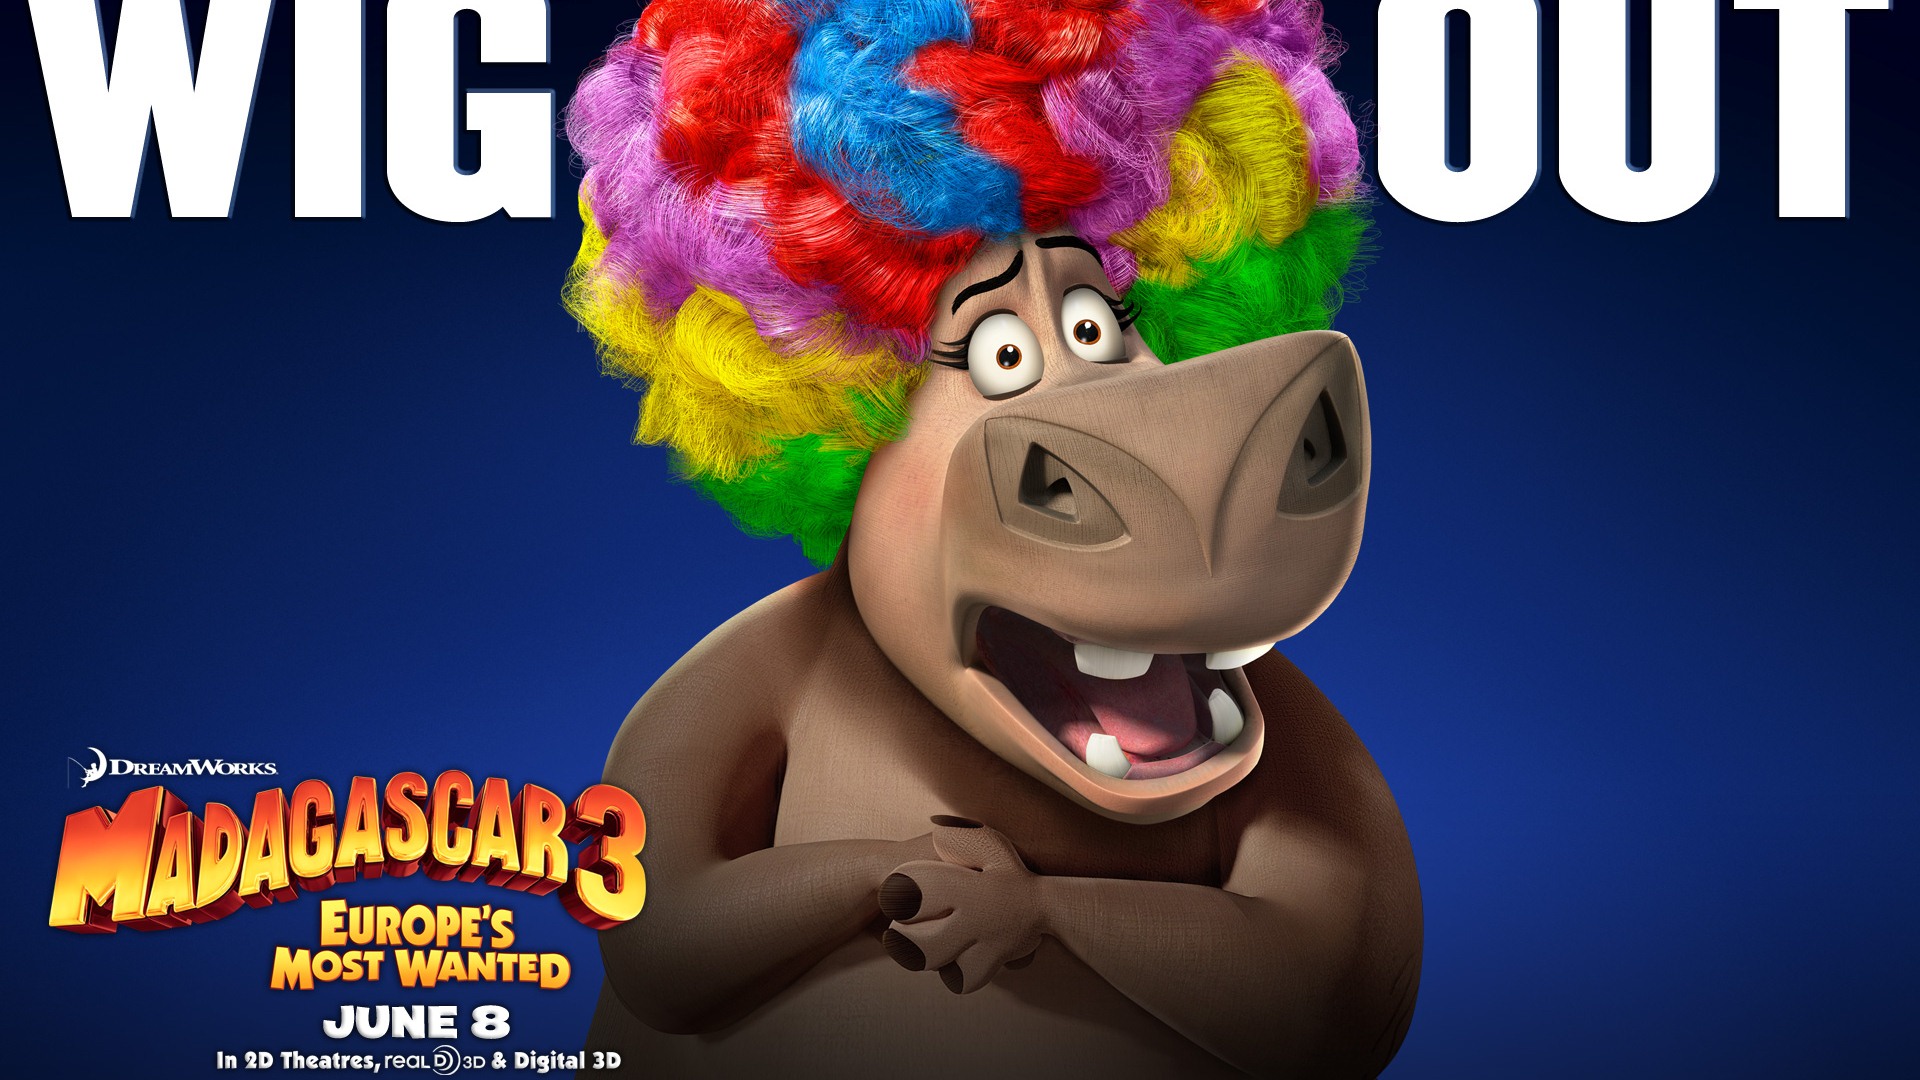 Madagascar 3: Europe's Most Wanted HD wallpapers #12 - 1920x1080